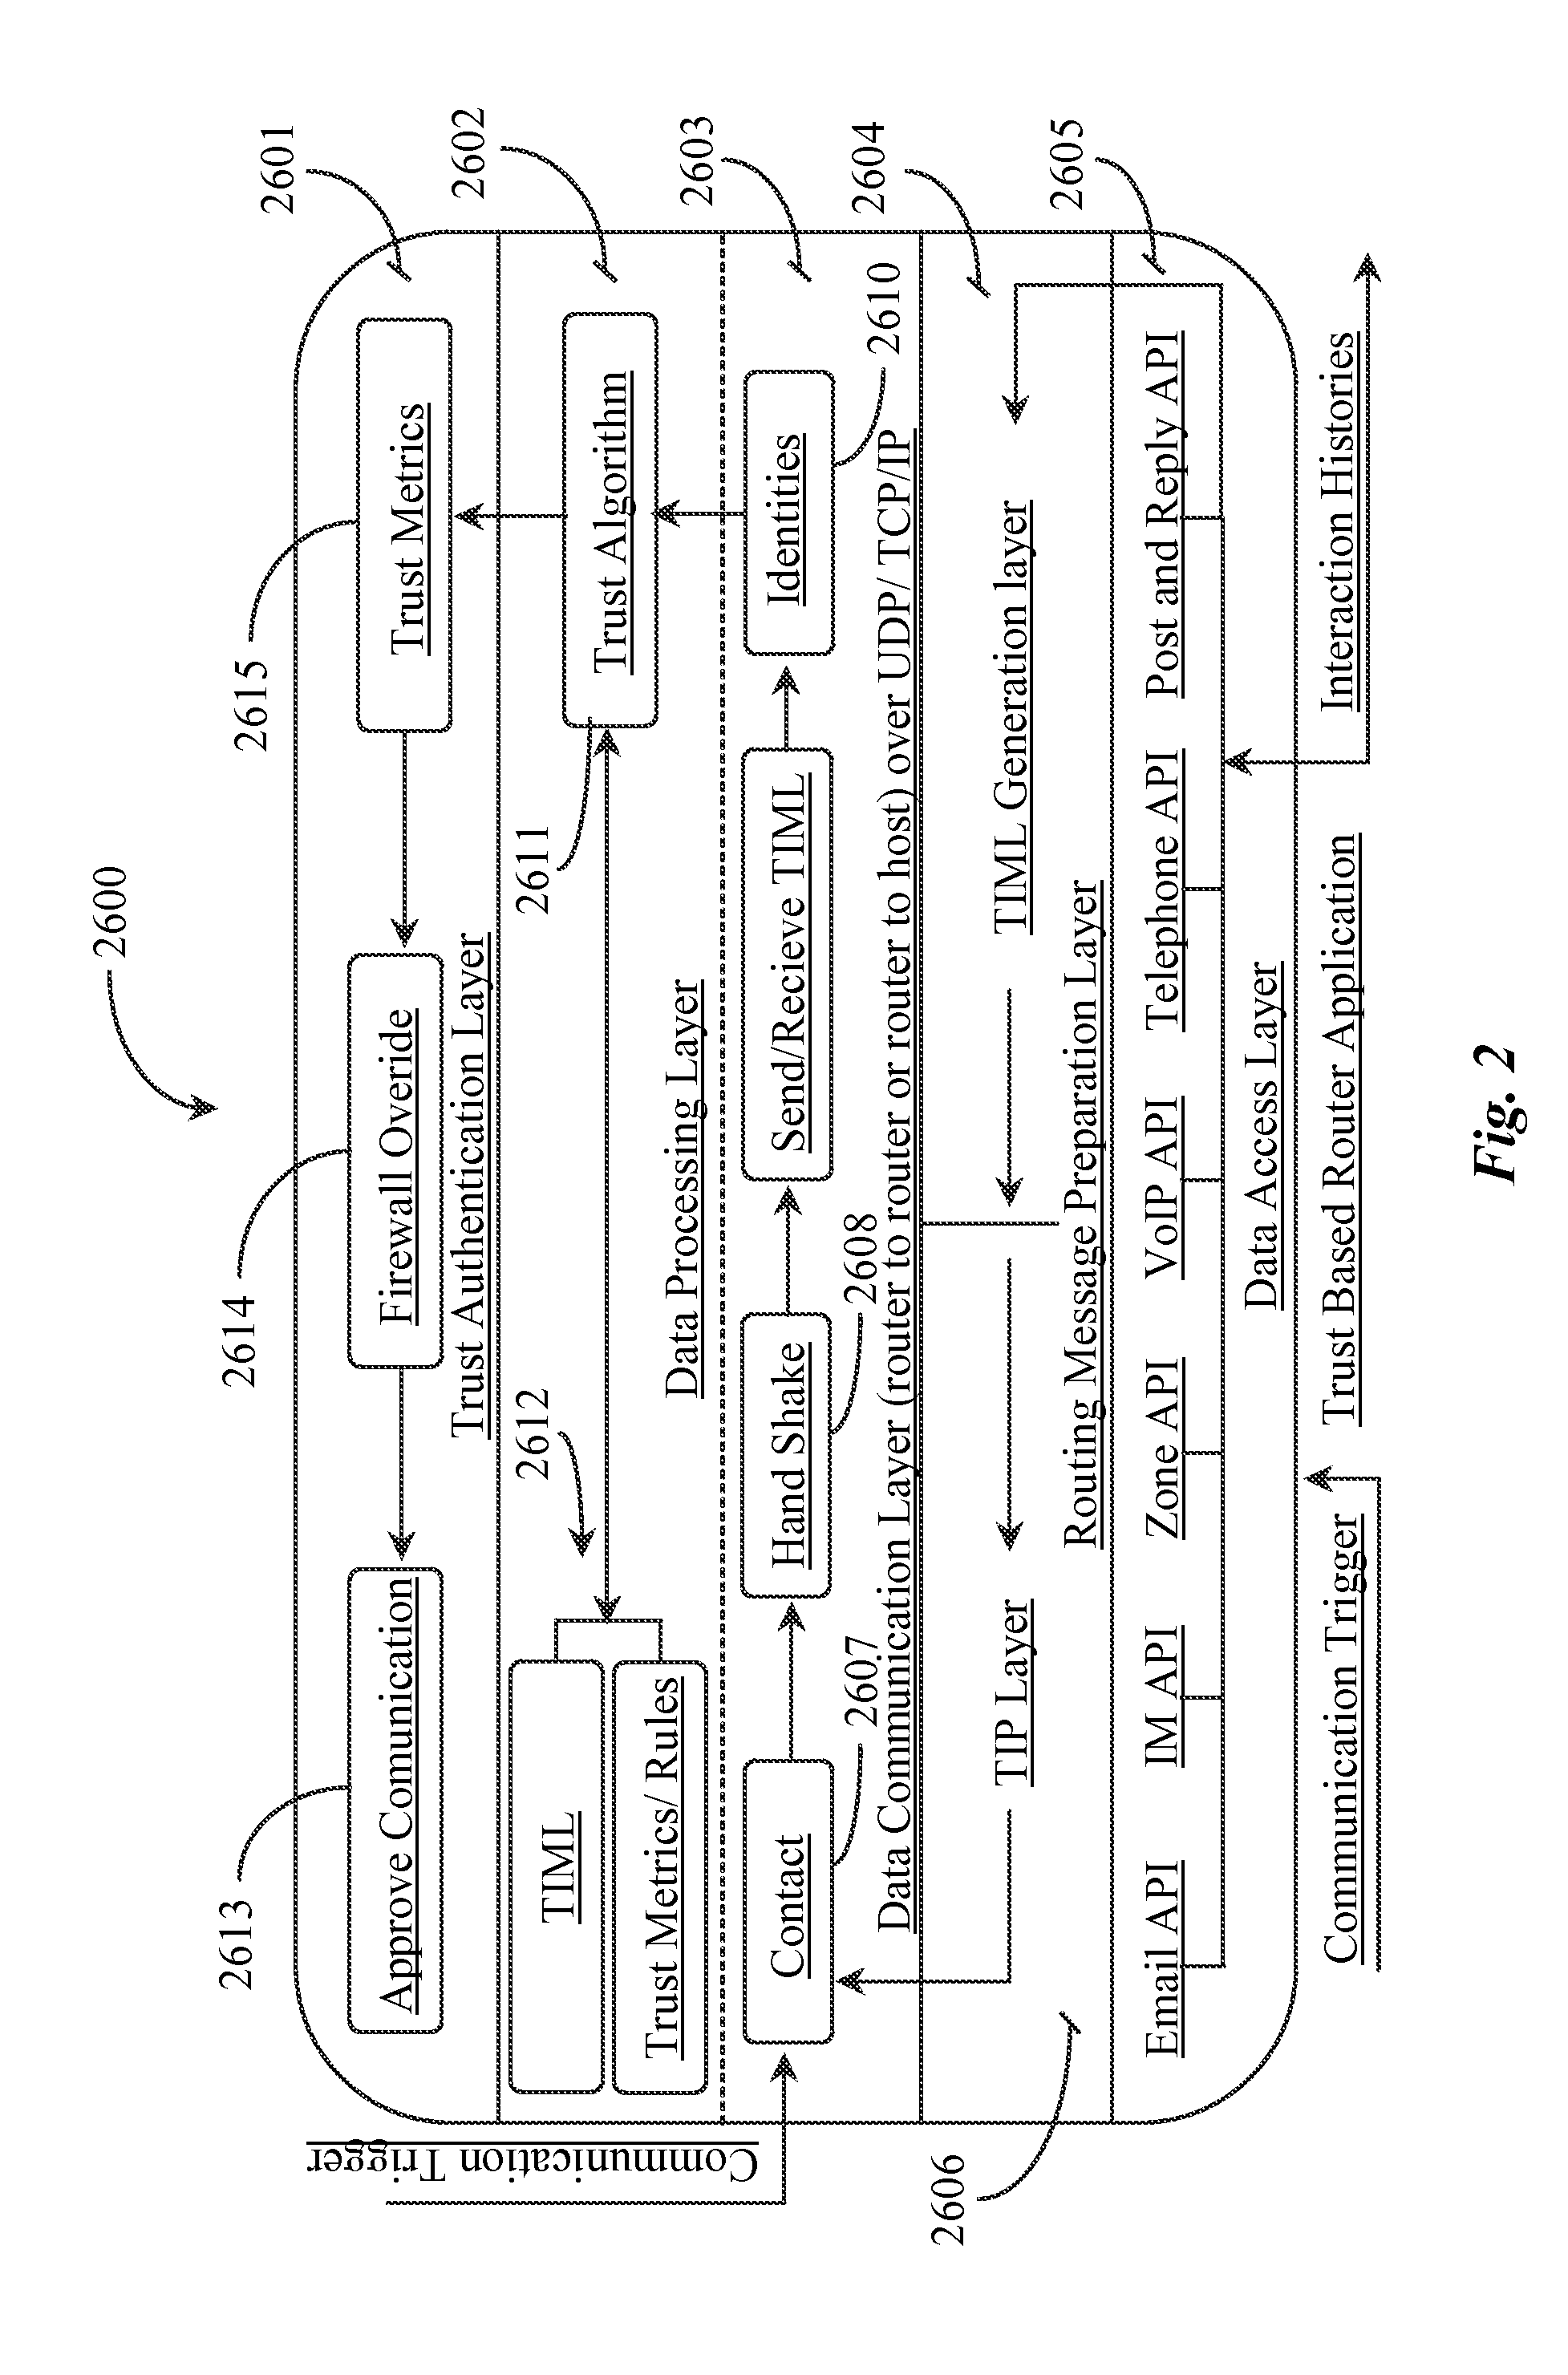 Methods and Apparatus for Enabling a Dynamic Network of Interactors According to Personal Trust Levels Between Interactors